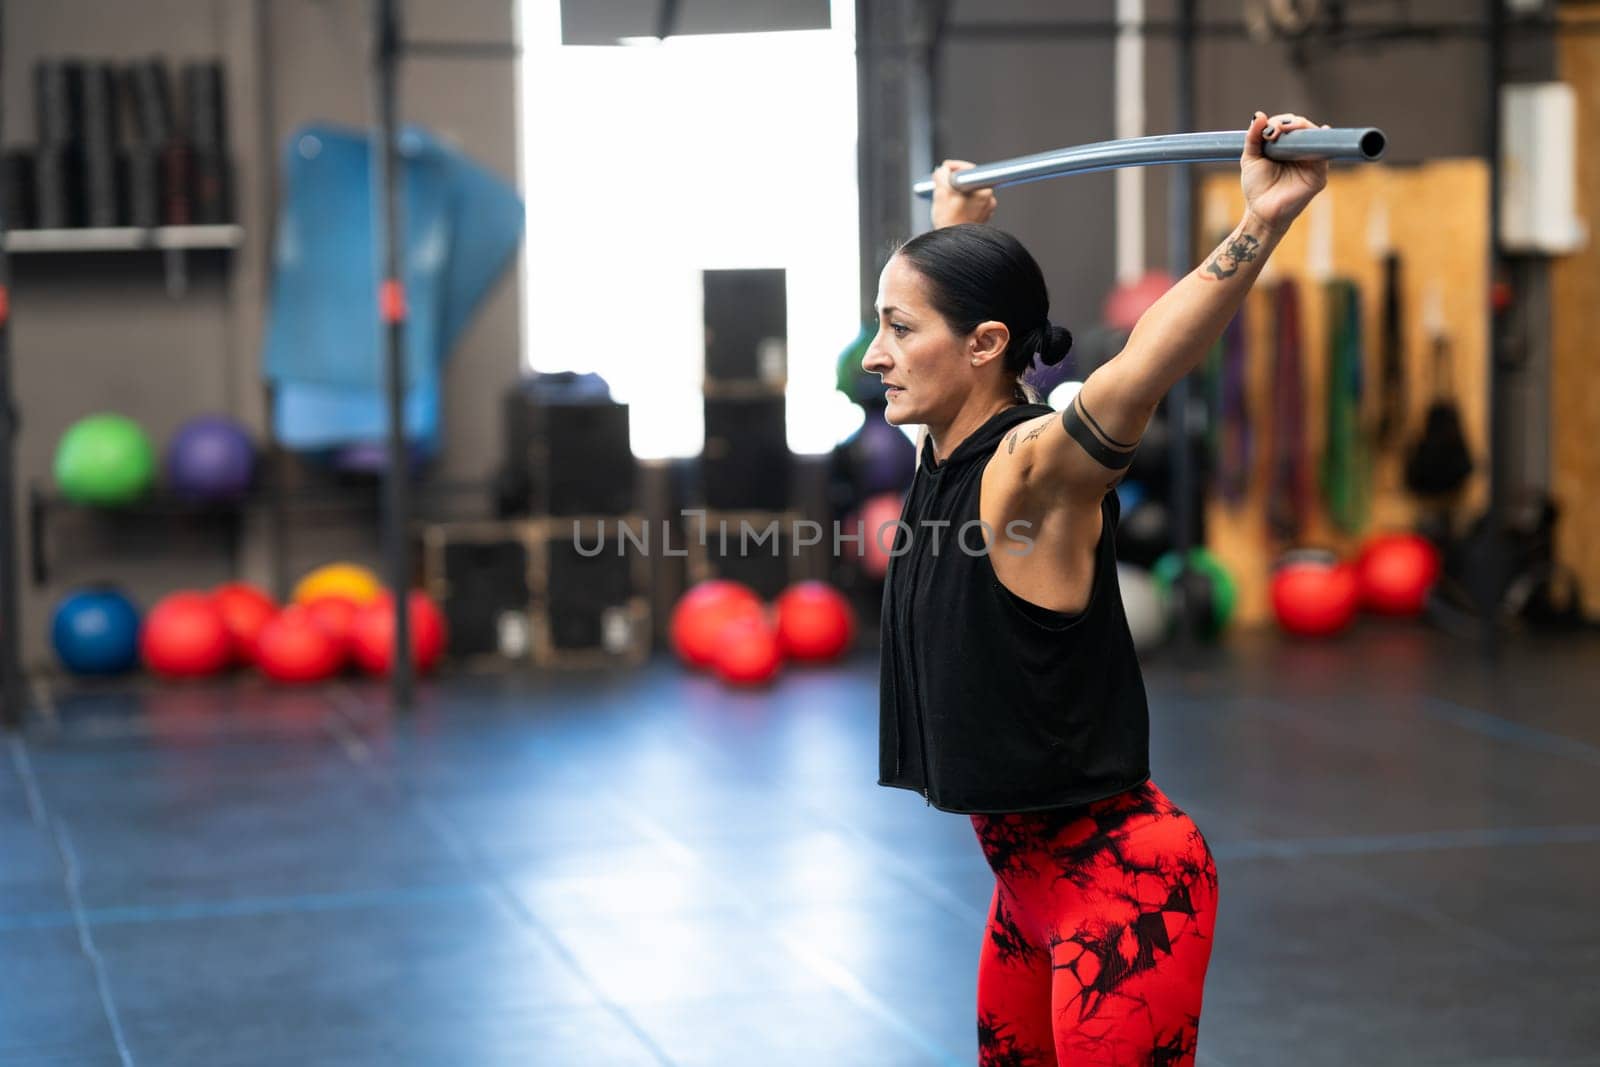 Horizontal photo with copy space of a mature woman warming up and stretching with a bar in a cross training gym